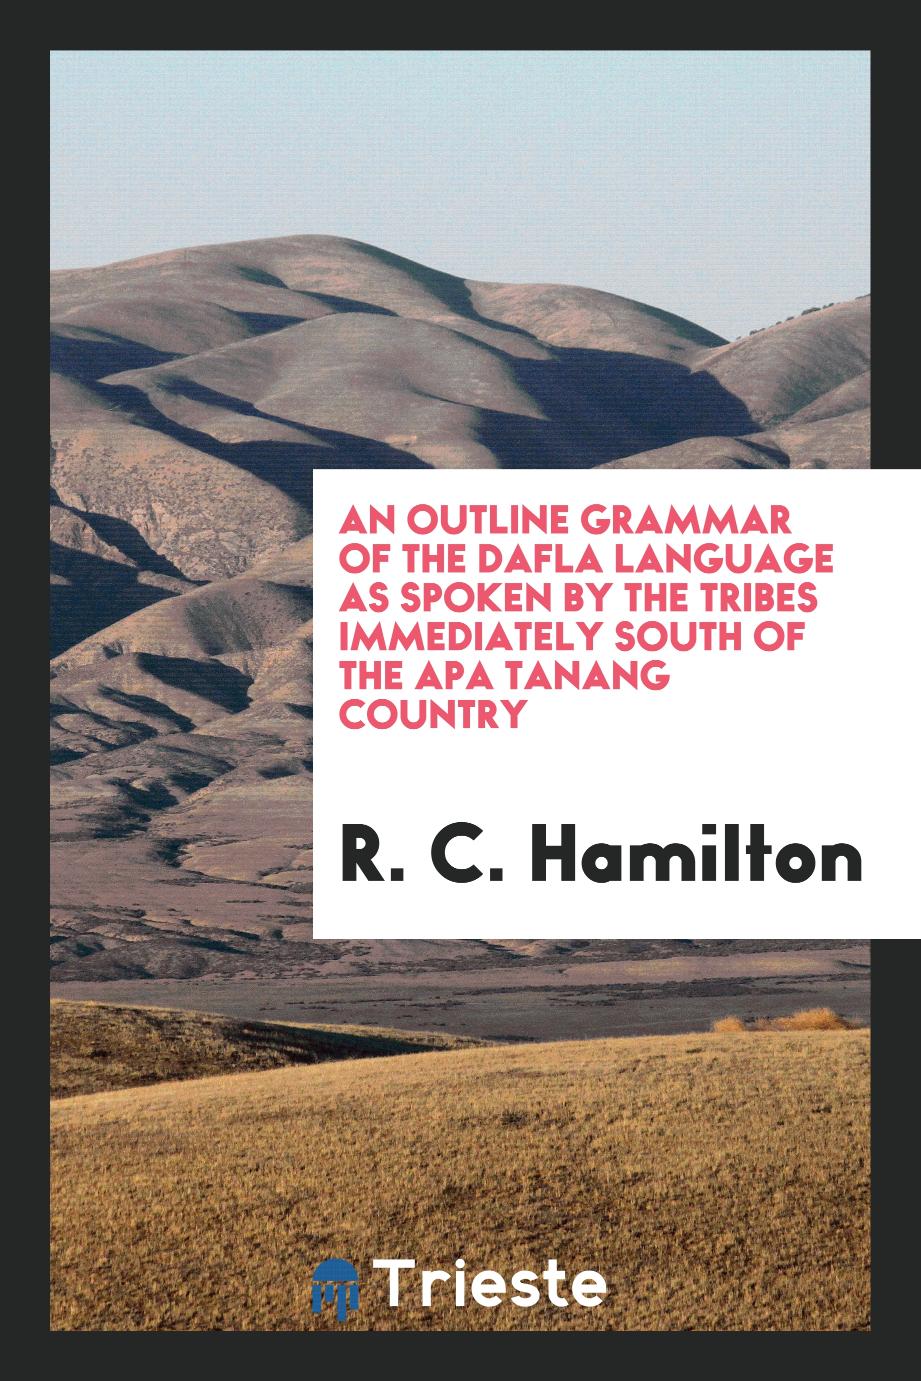 An Outline Grammar of the Dafla Language as Spoken by the Tribes Immediately South of the Apa Tanang Country